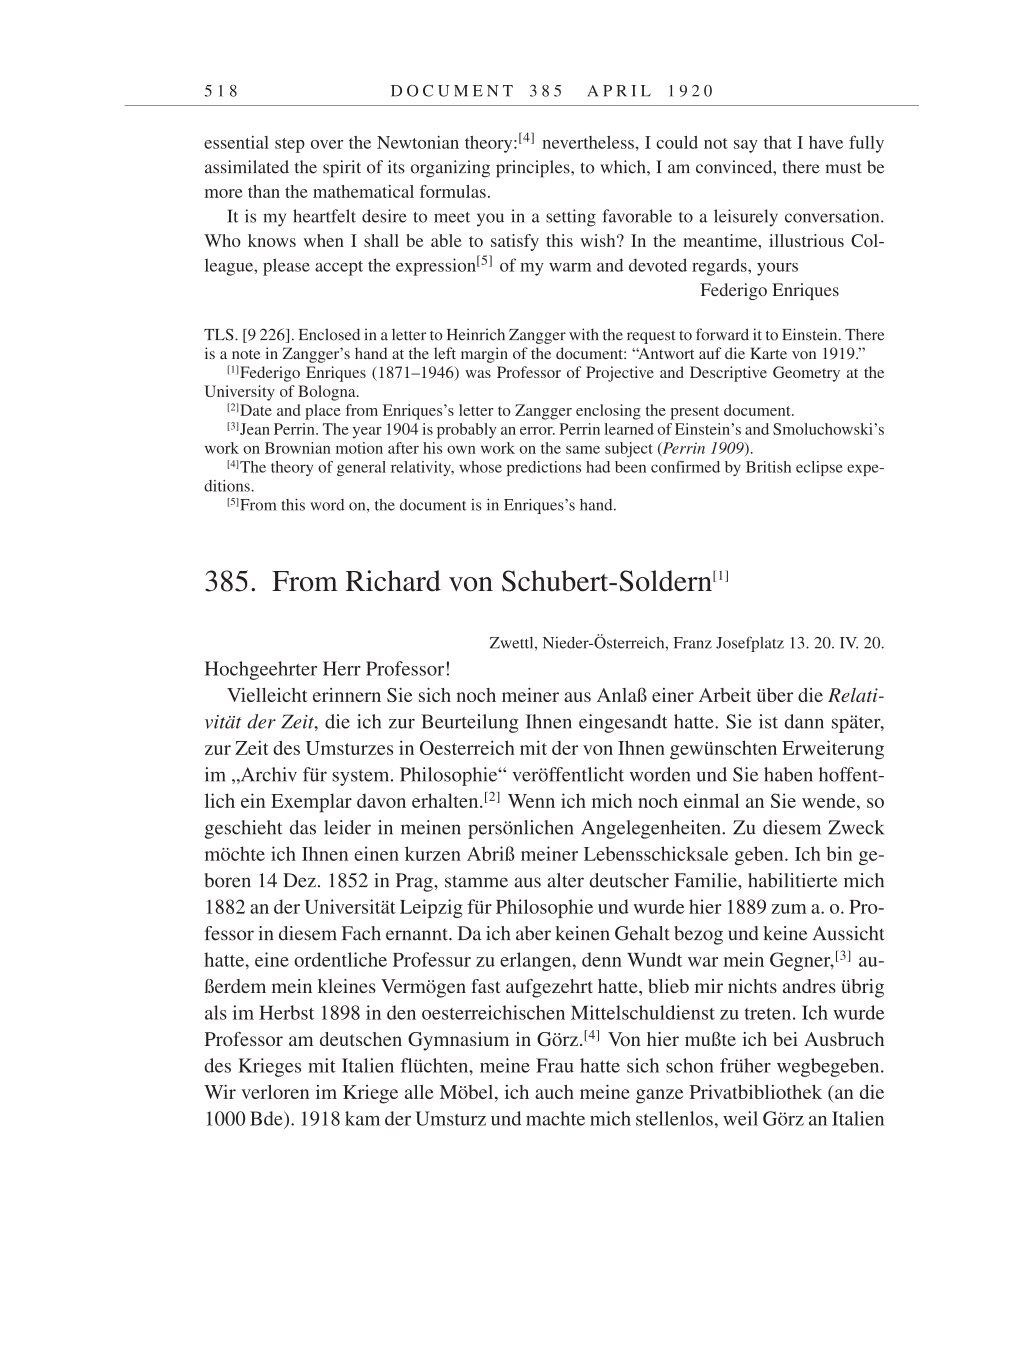 Volume 9: The Berlin Years: Correspondence January 1919-April 1920 page 518